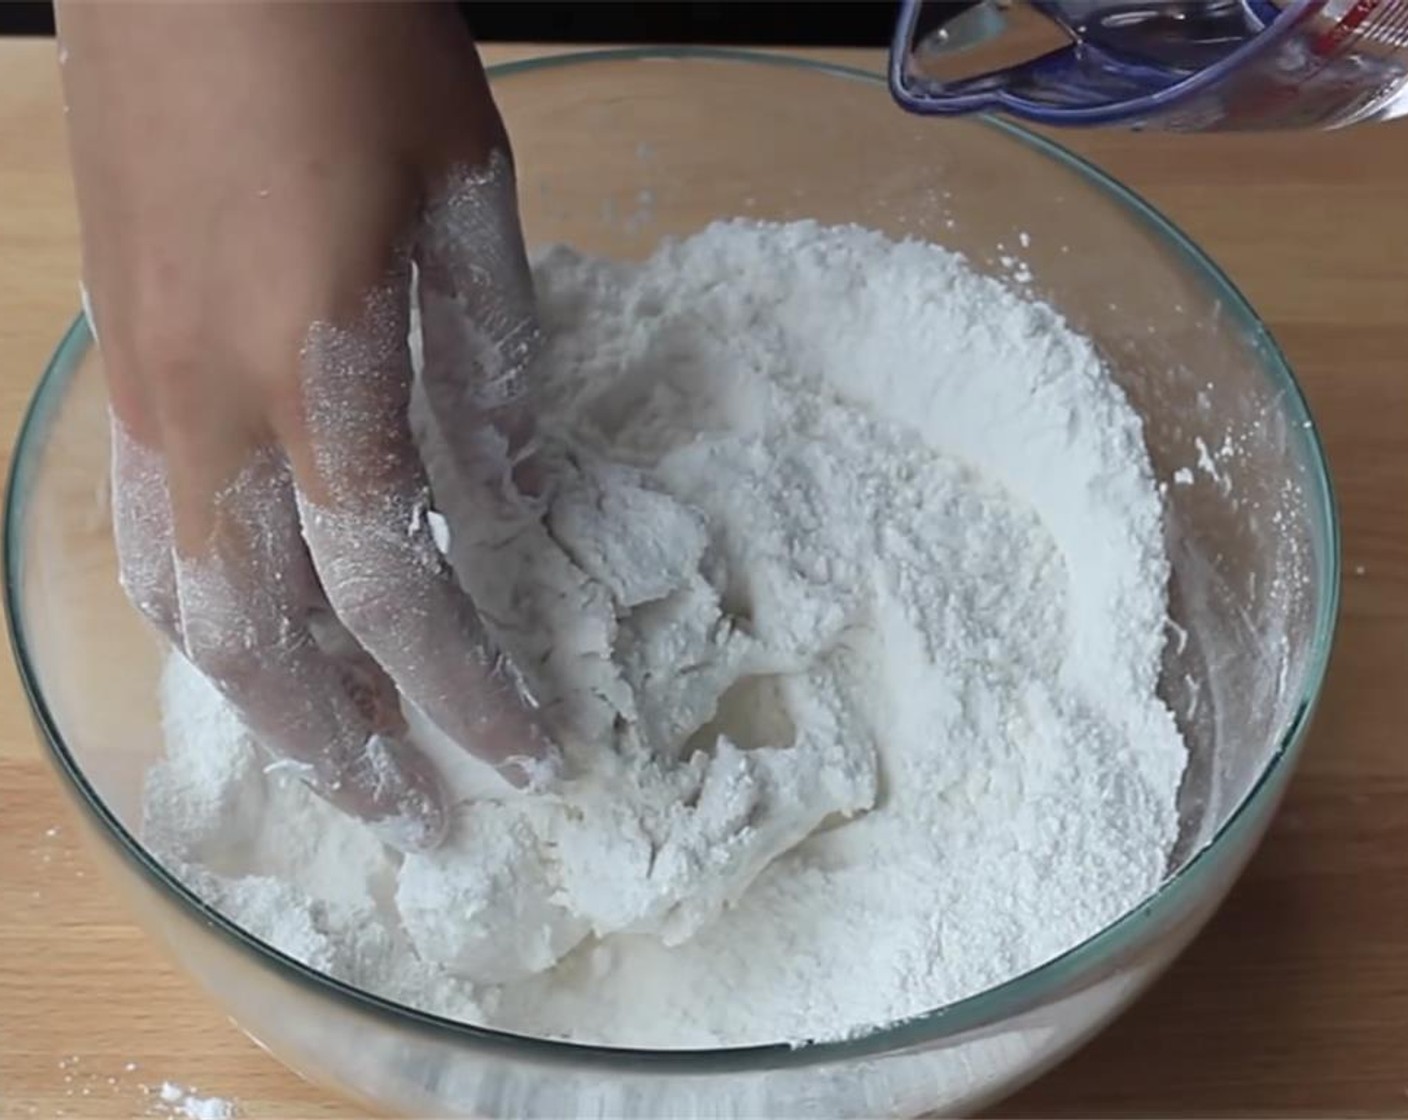 step 3 In a large bowl, mix the remaining glutinous rice flour with Granulated Sugar (1/3 cup) and Baking Powder (1/2 tsp). Add in the small dough. Slowly stir in Water (to taste) and continue kneading until smooth.